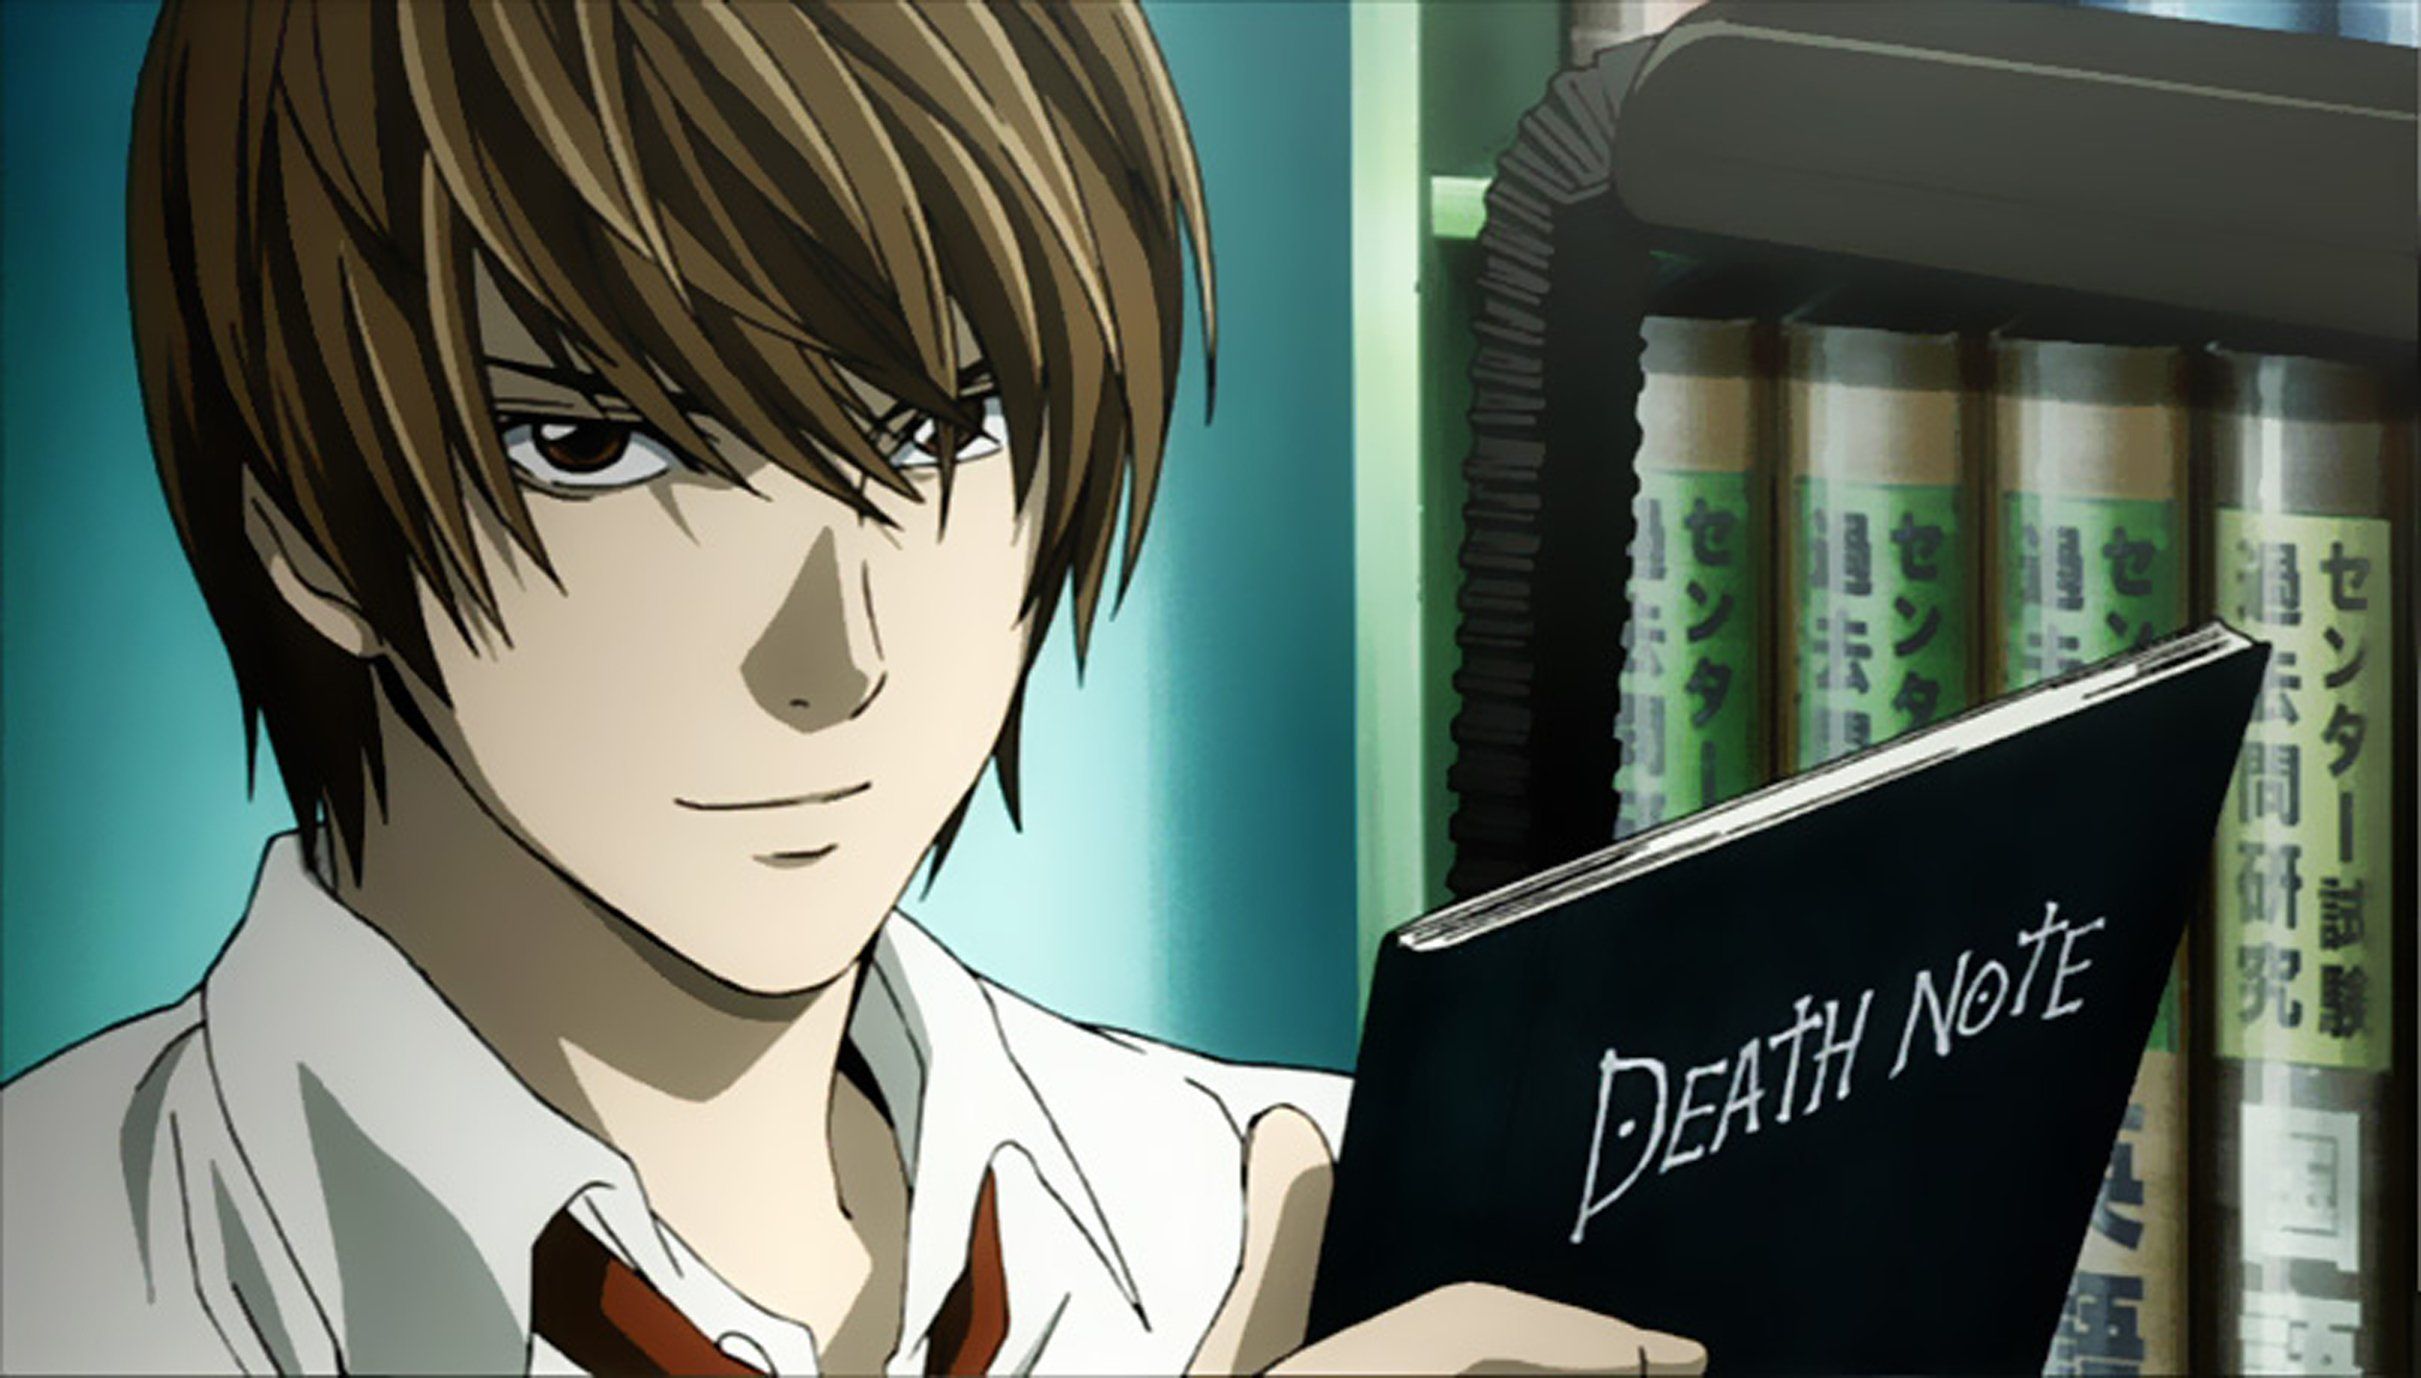 death, Note, Light, Yagami Wallpaper HD / Desktop and Mobile Background